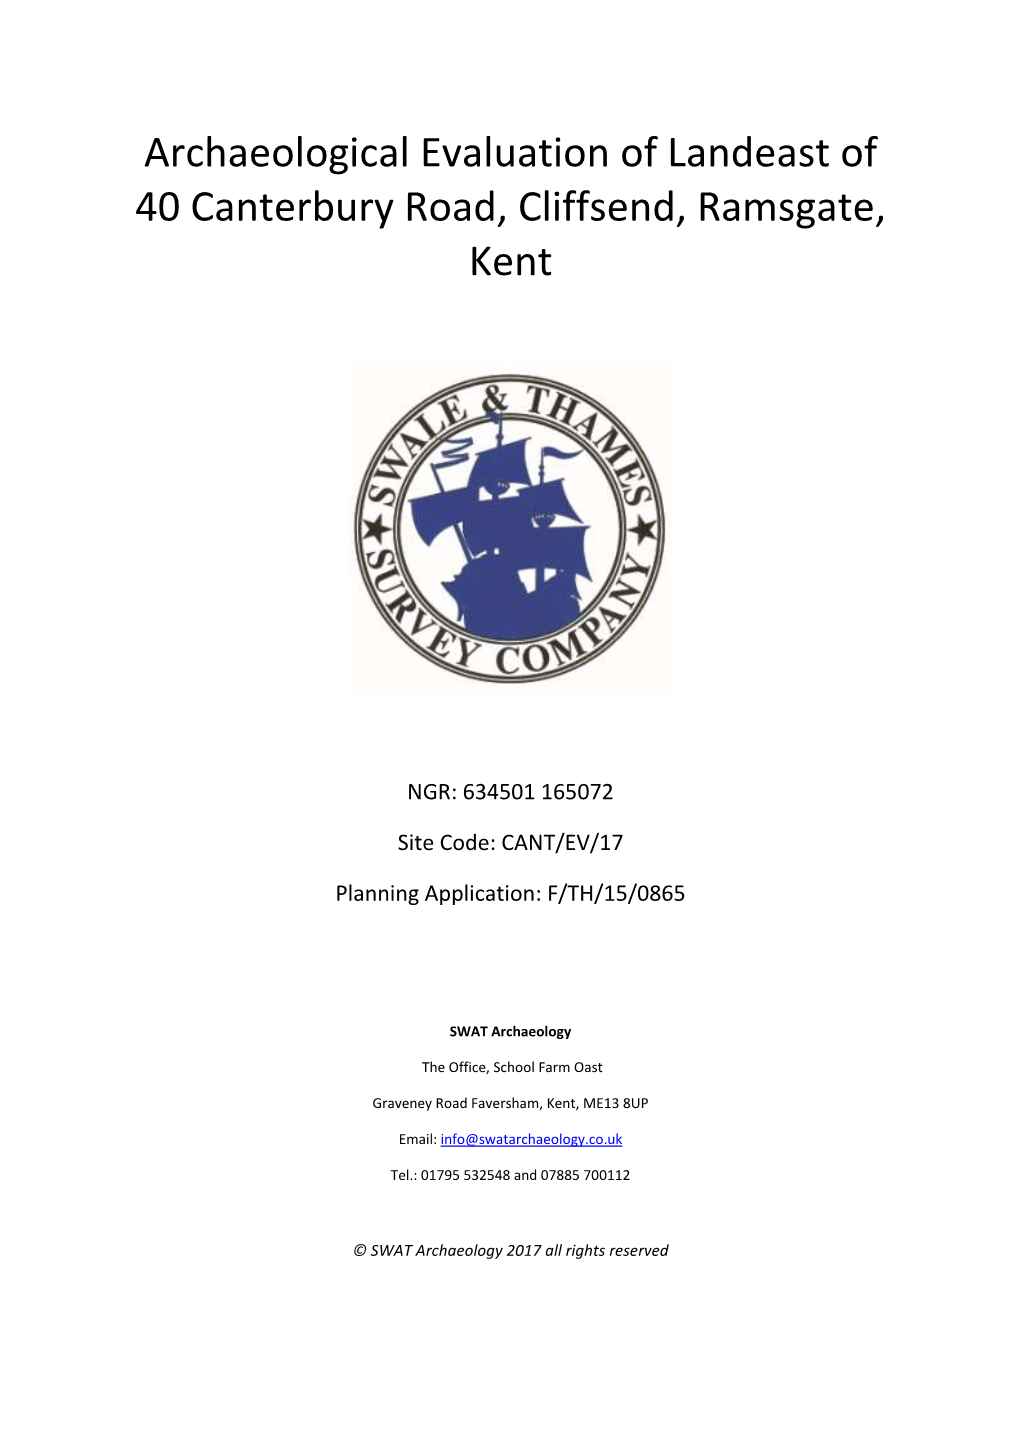 Archaeological Evaluation of Landeast of 40 Canterbury Road, Cliffsend, Ramsgate, Kent